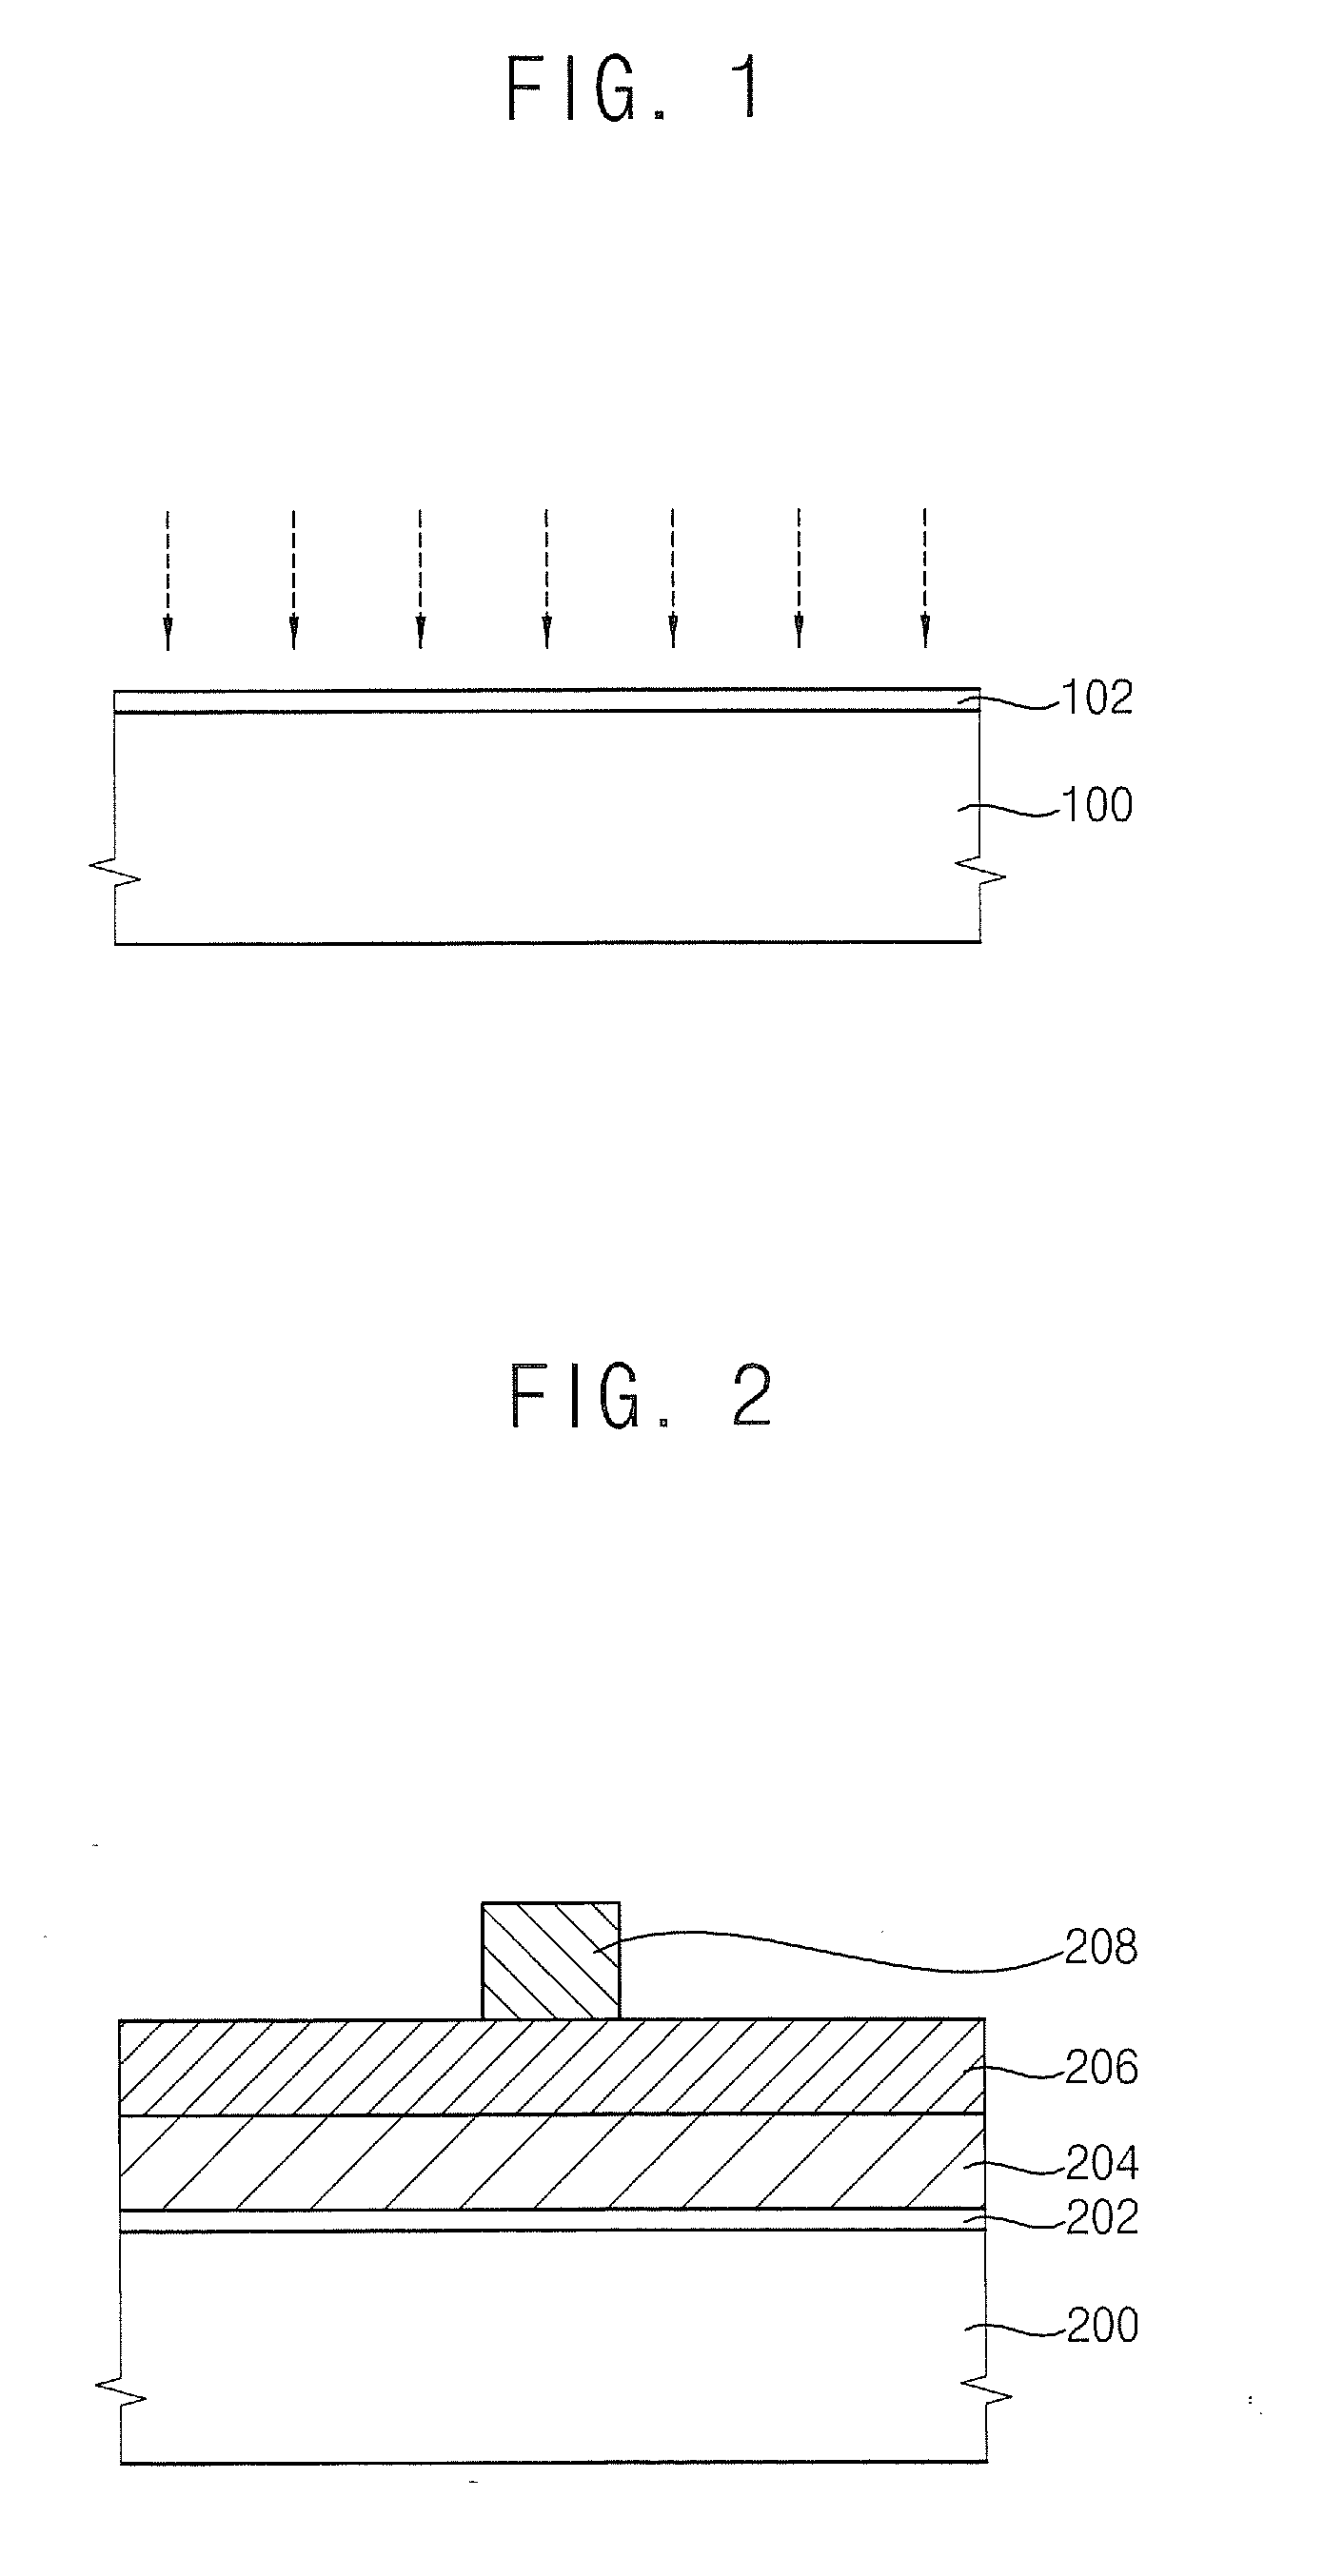 Methods of Forming an Oxide Layer and Methods of Forming a Gate Using the Same